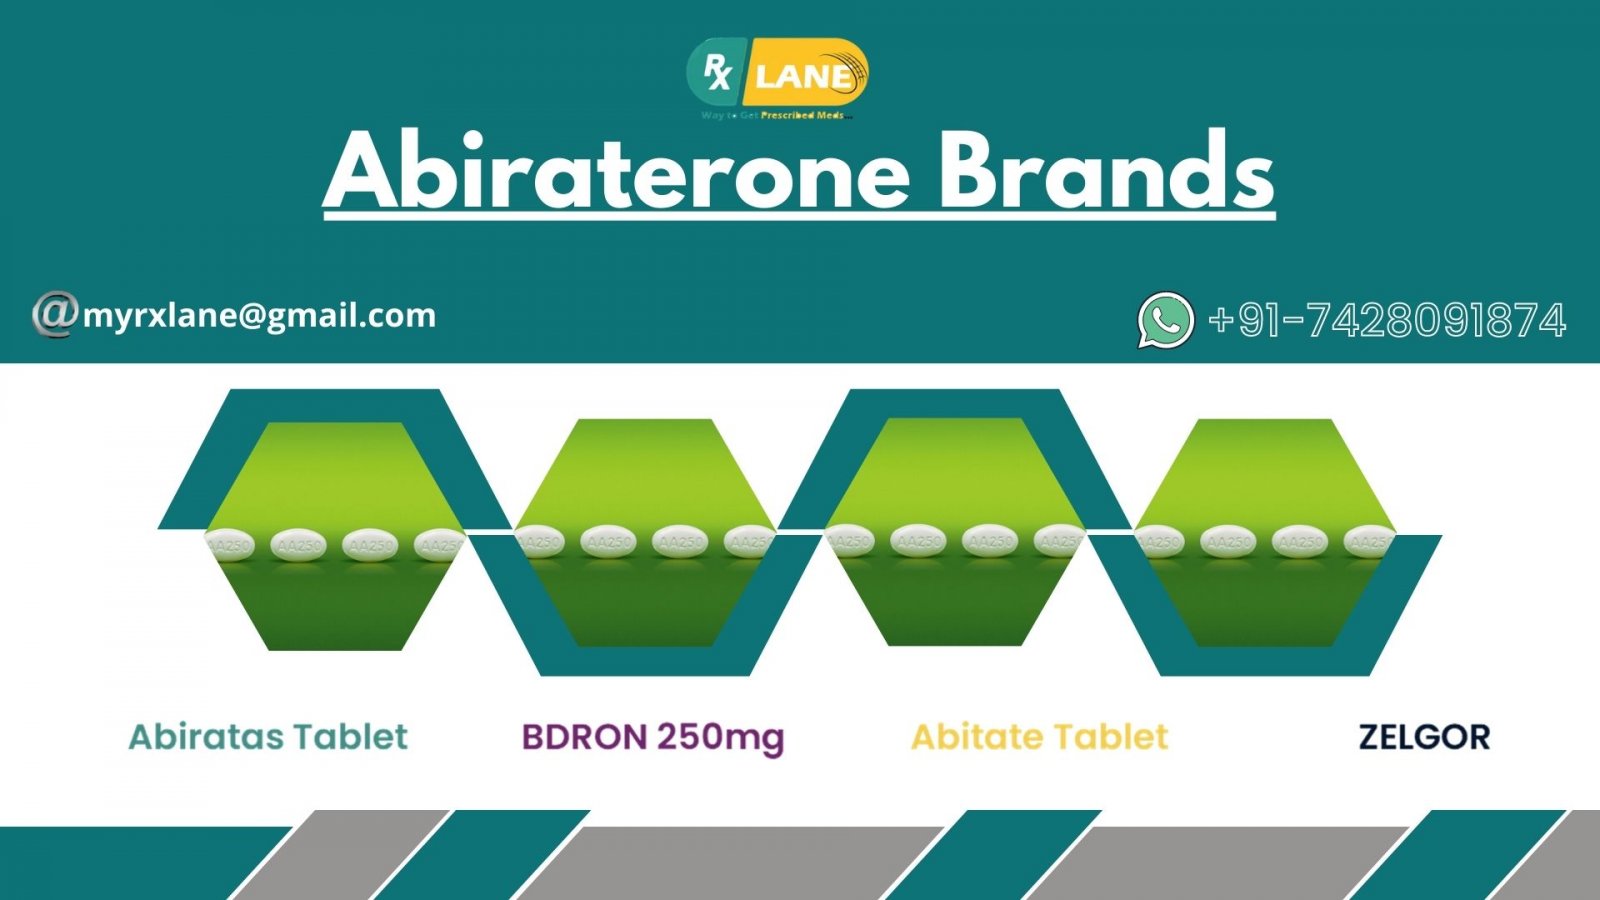 Abiraterone Acetate’s other generic manufacturer and different brands availability in India